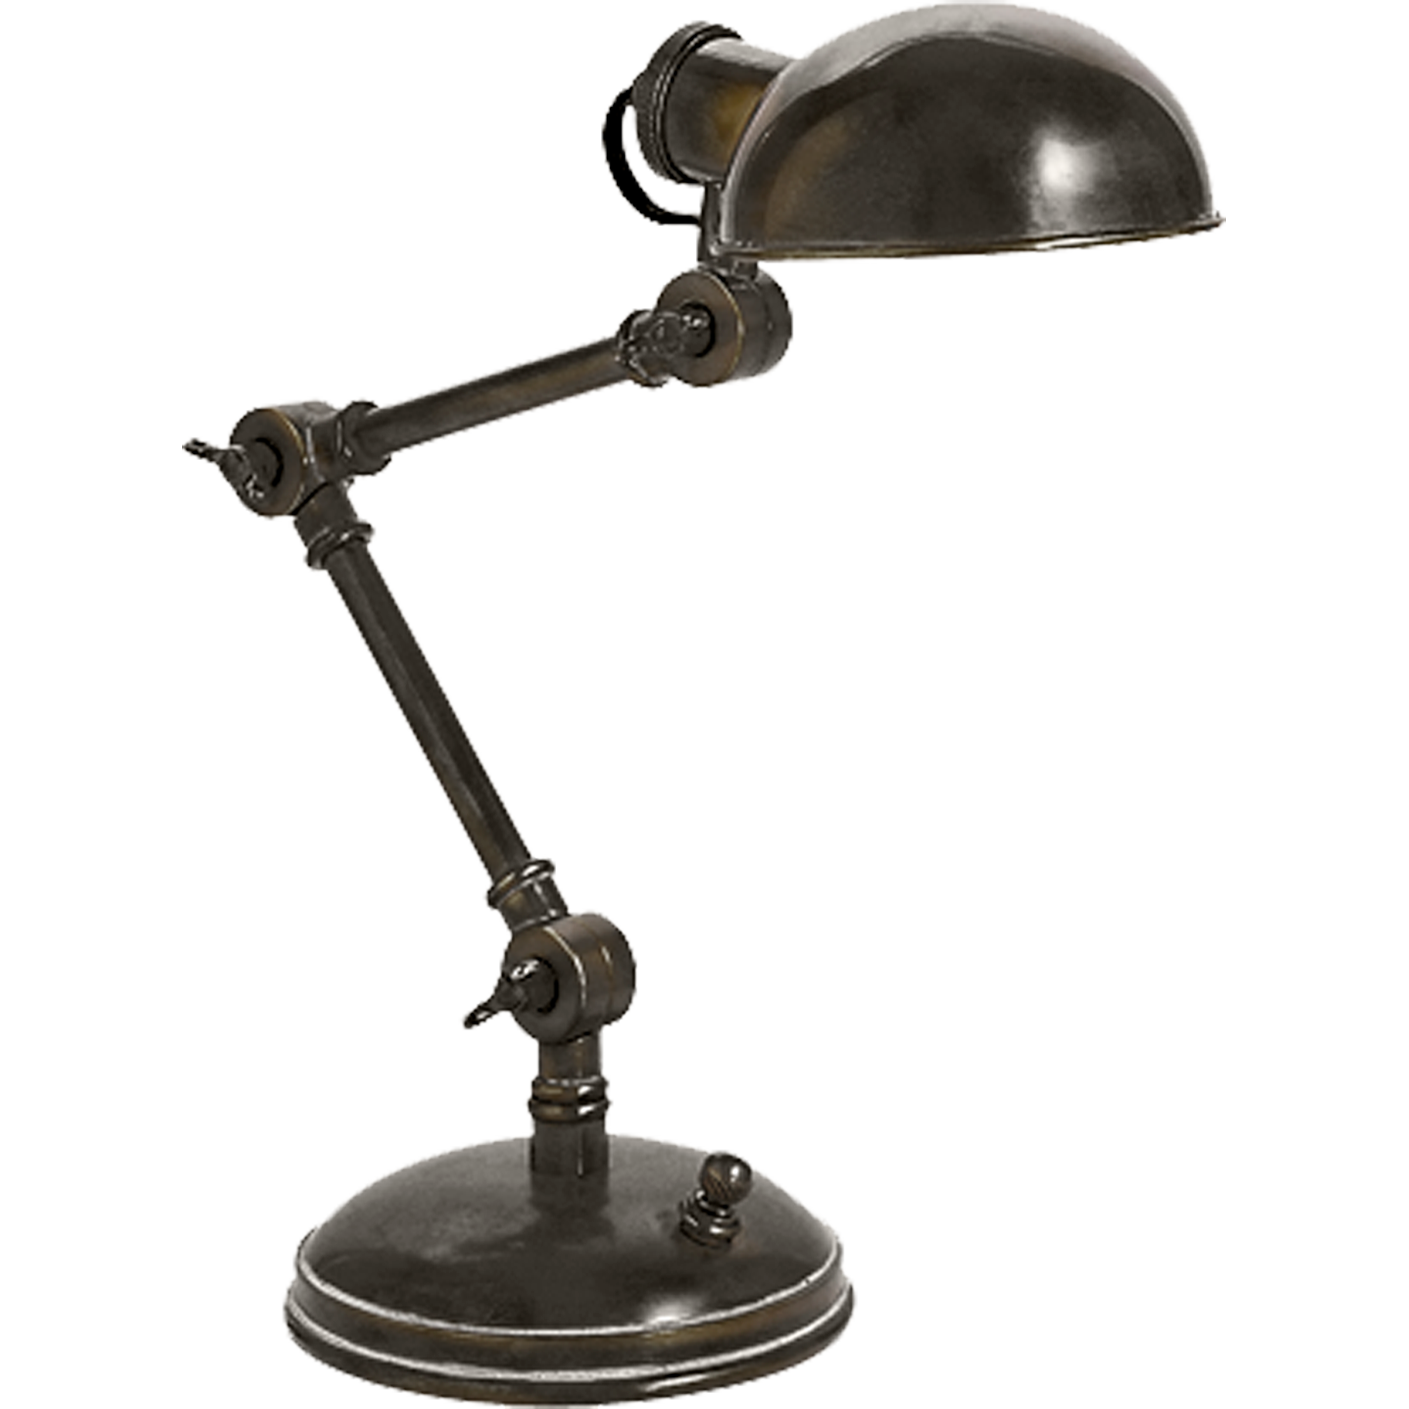 The Pixie Table Lamp